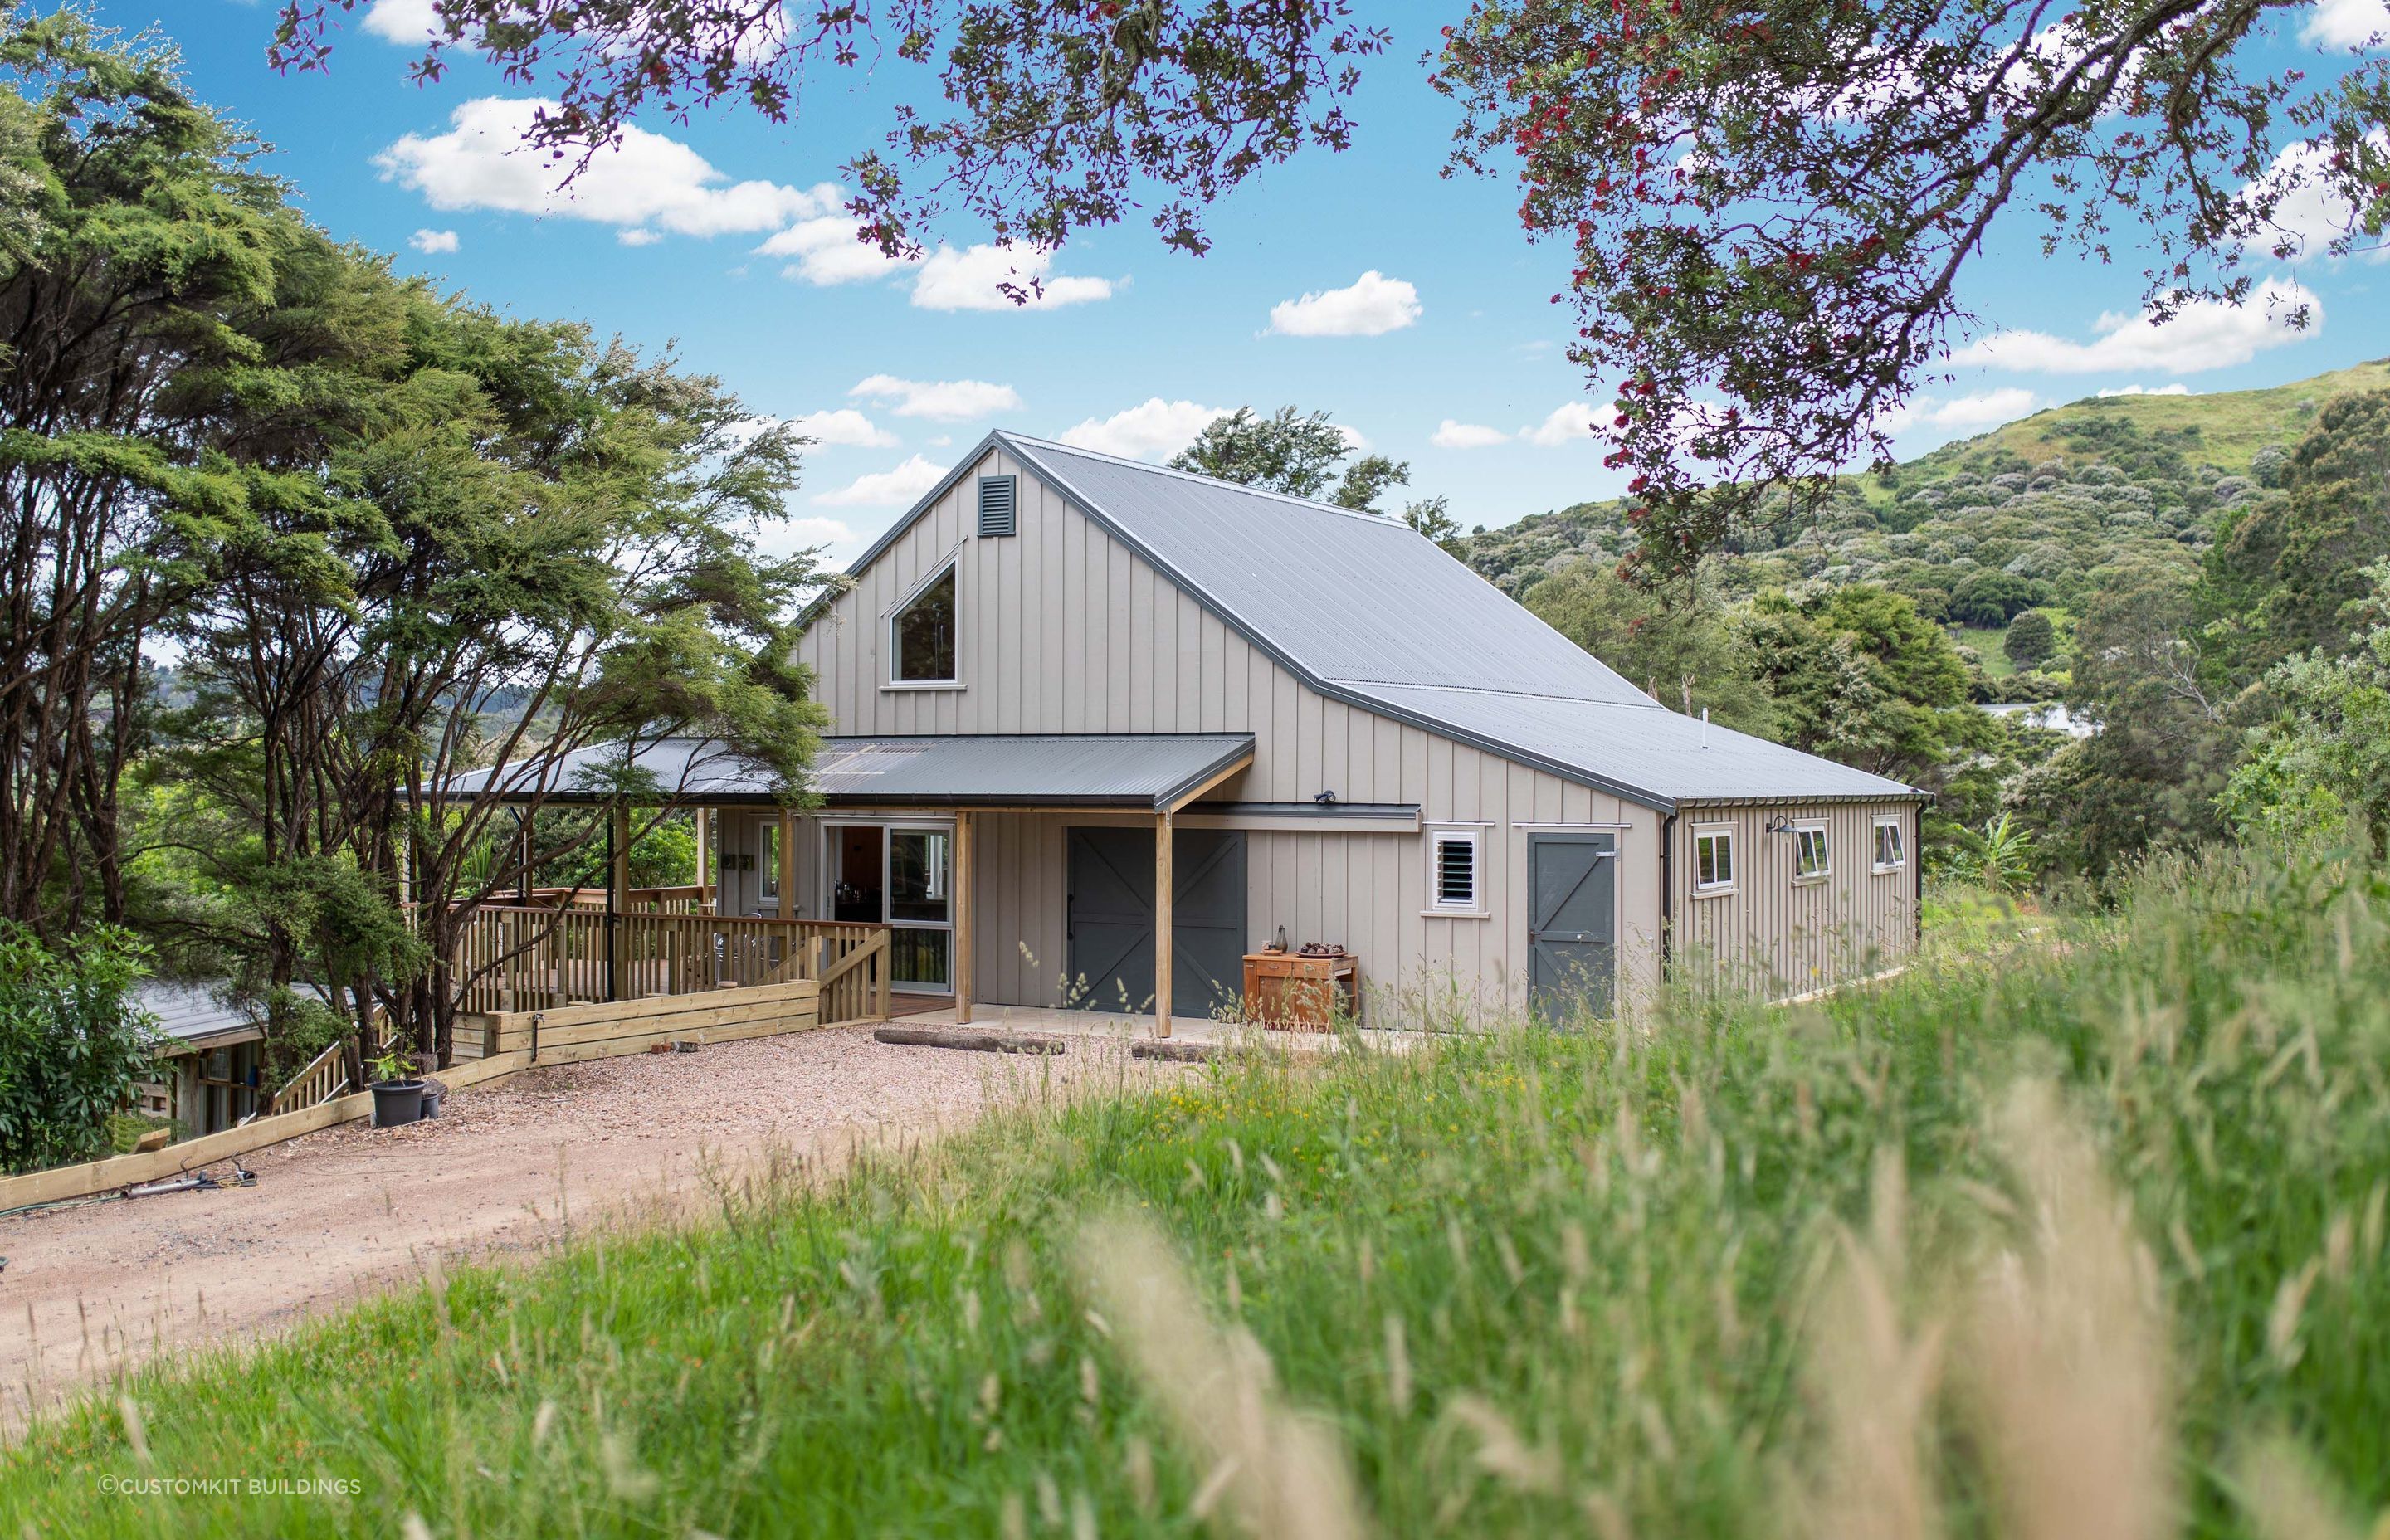 This Waiheke Island Barn House blends in perfectly with its natural surroundings.